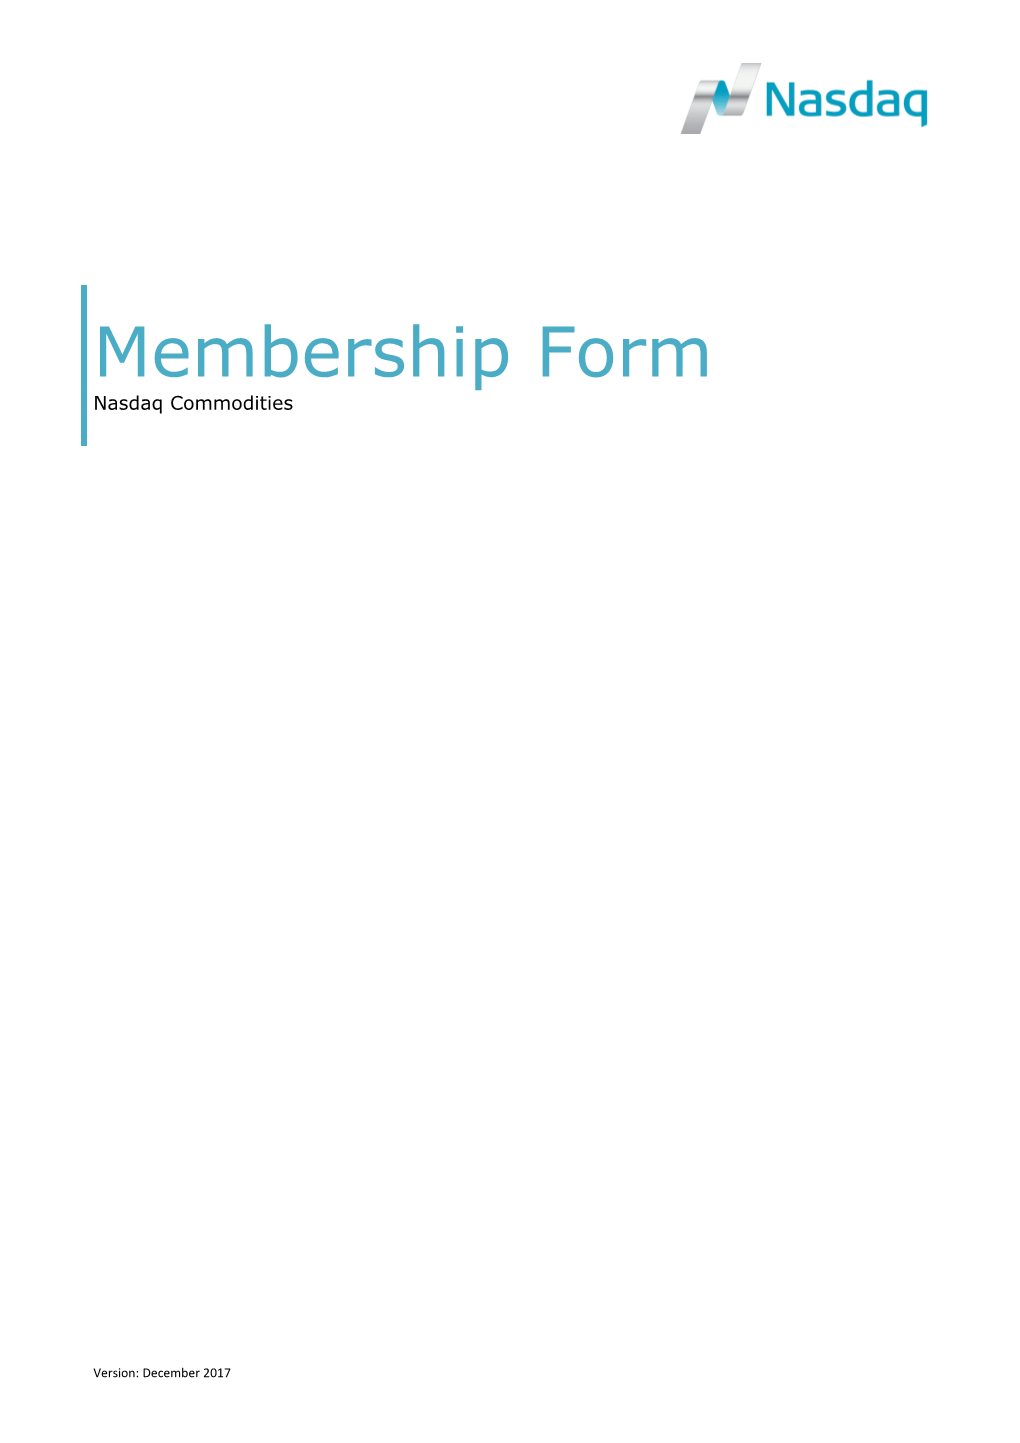 Thank You for Your Interest in Nasdaqcommodities. If You Are Applying for Membership Thisform